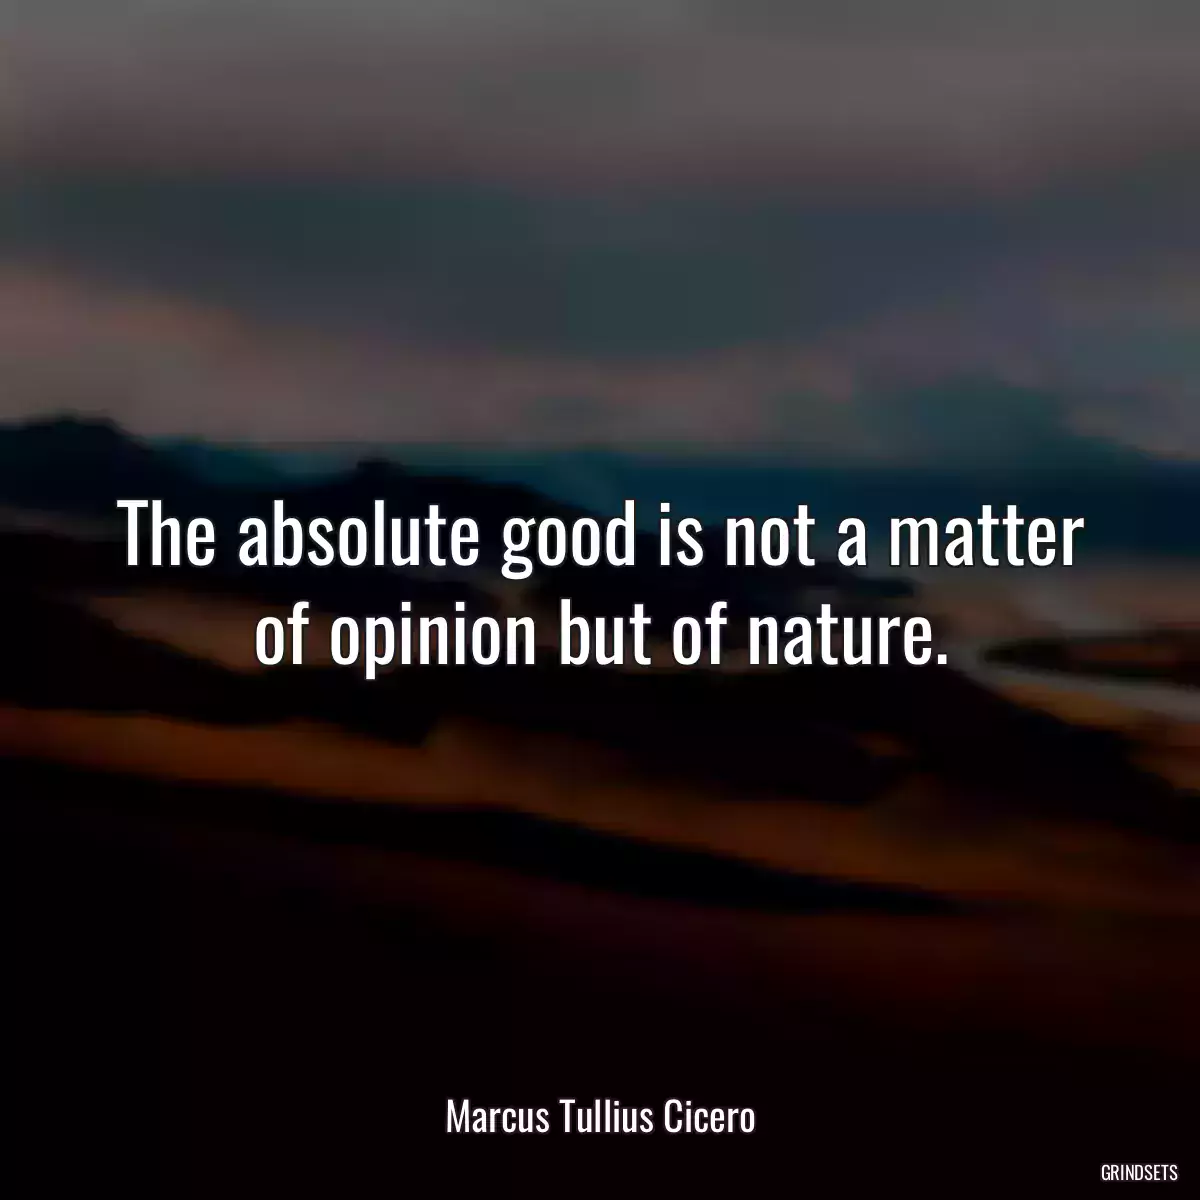 The absolute good is not a matter of opinion but of nature.